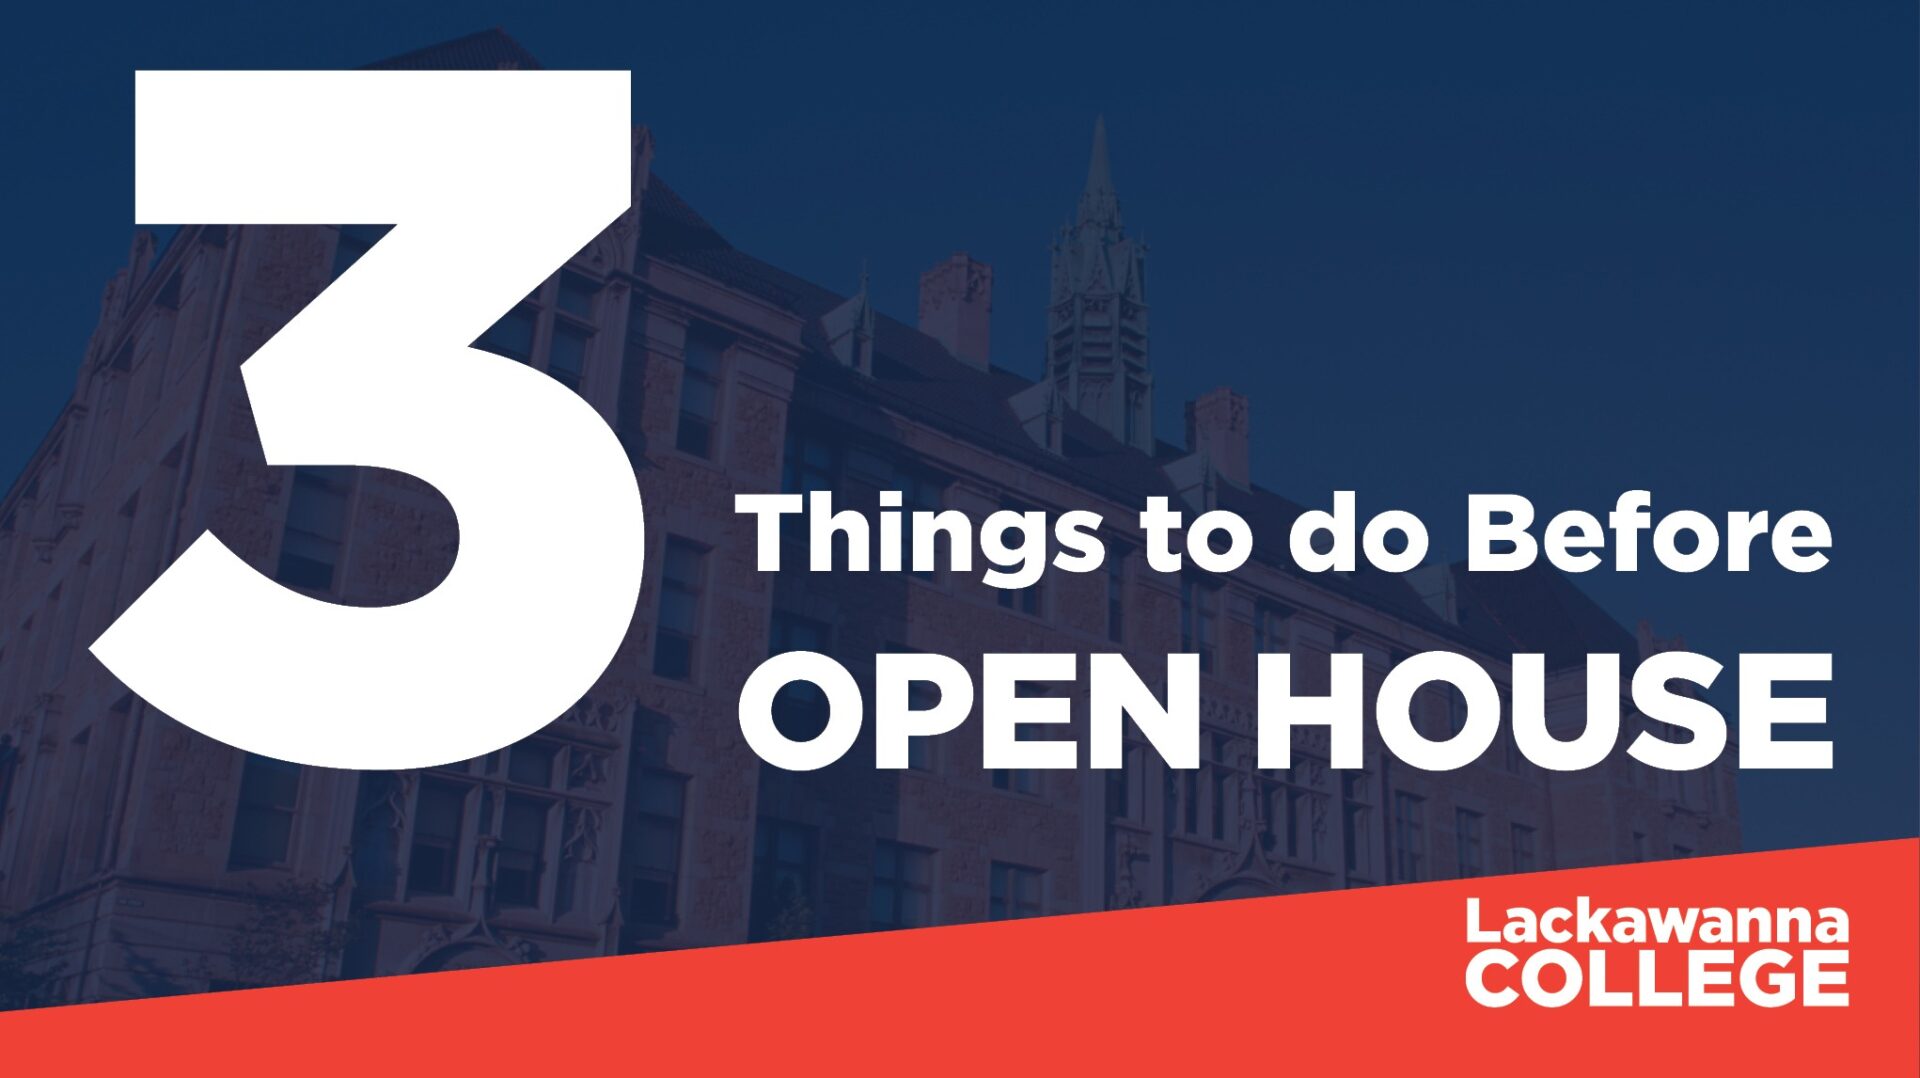 3 Things to do Before Open House